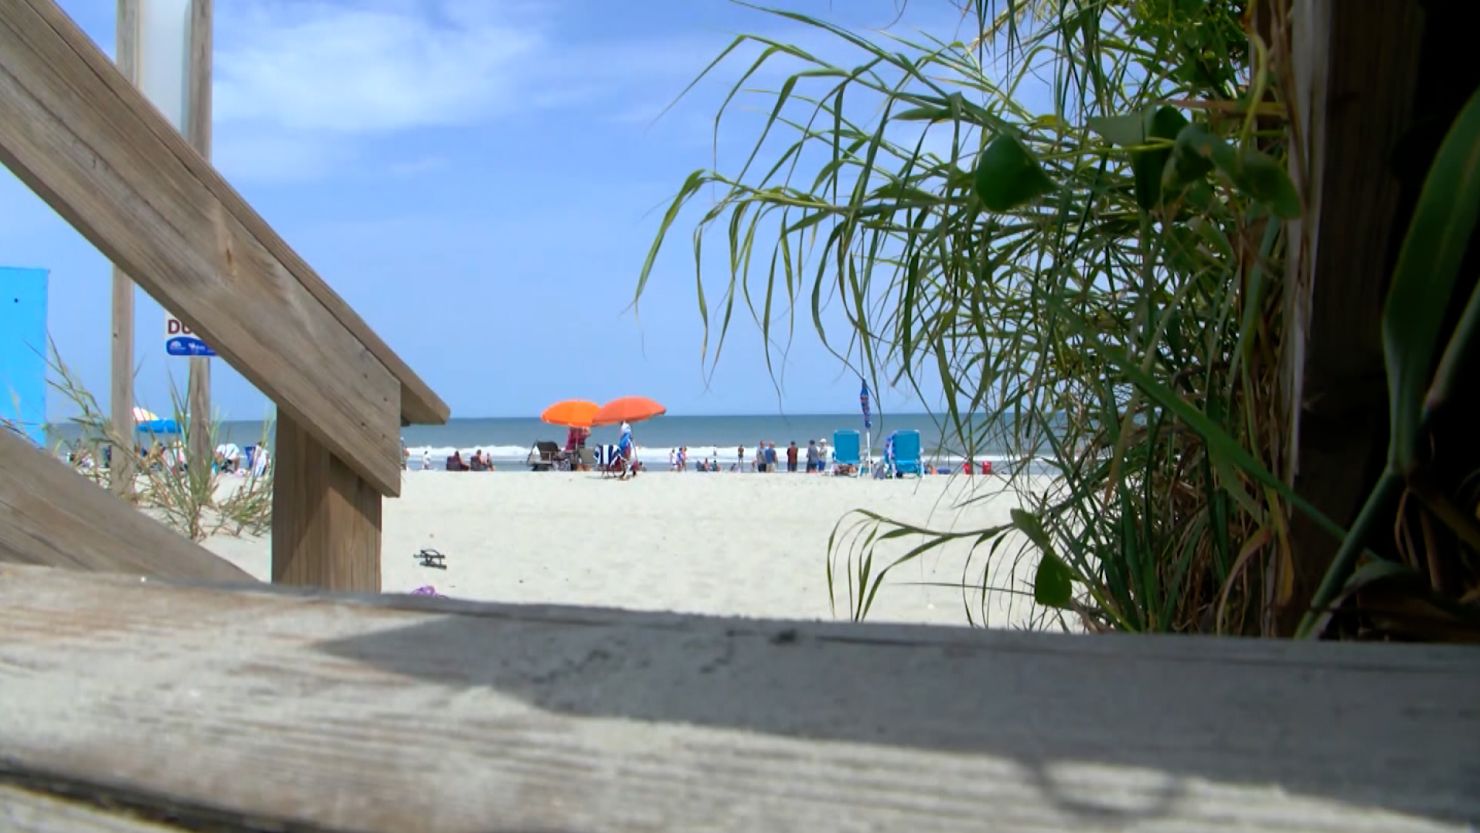 A woman died after being struck by a beach umbrella that tumbled "end over end down the beach," striking her in her torso, according to a report from authorities. 